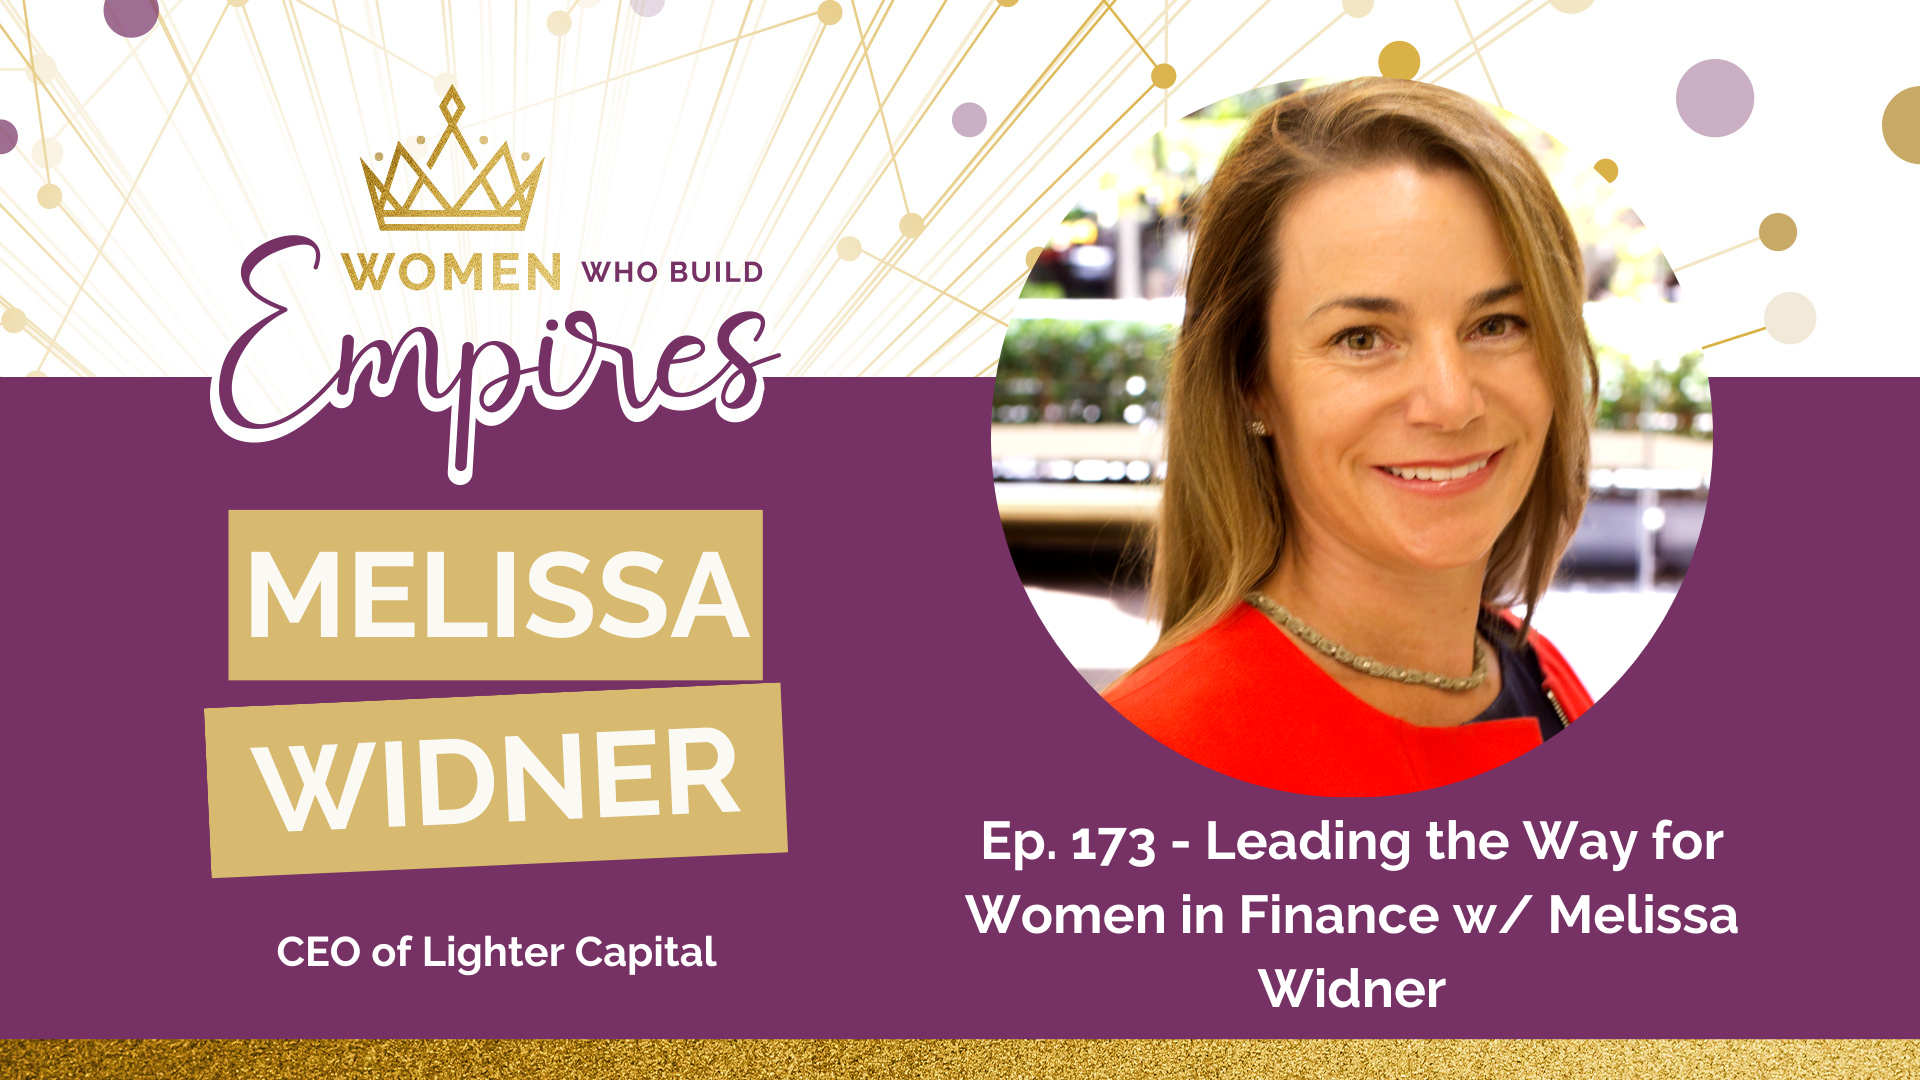 Ep. 173 – Leading the Way for Women in Finance w/ Melissa Widner